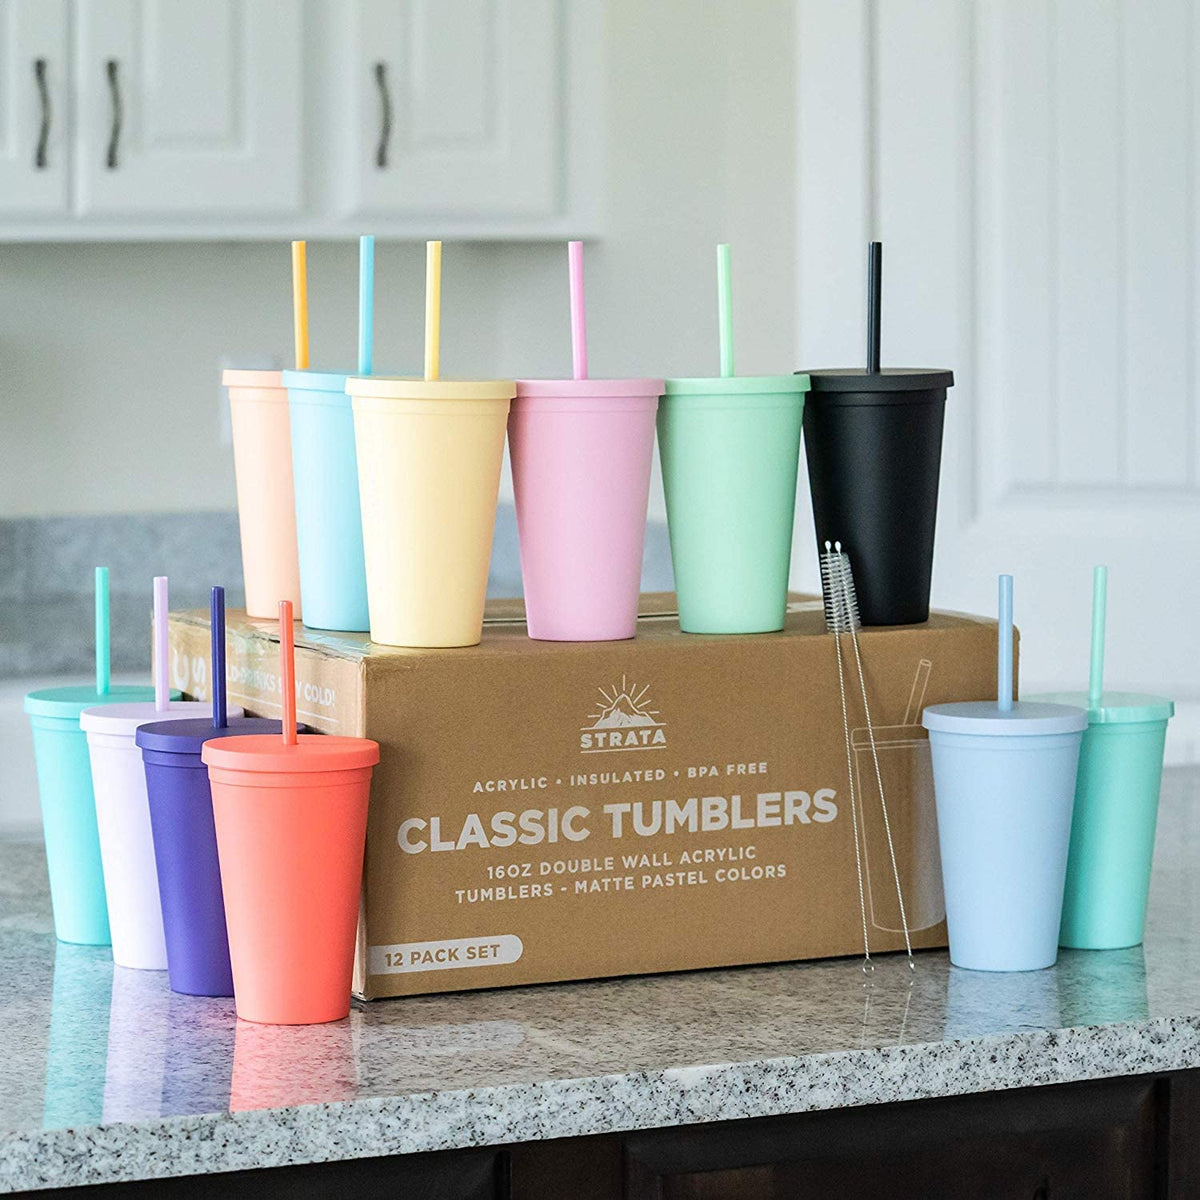  STRATA CUPS Pink Skinny Tumblers with Lids and Straws (4 pack)  - 16oz Matte Pastel Colored Acrylic Tumblers with Lids and Straws, Double  Wall Skinny Tumbler Bulk, Reusable Cup with Straw